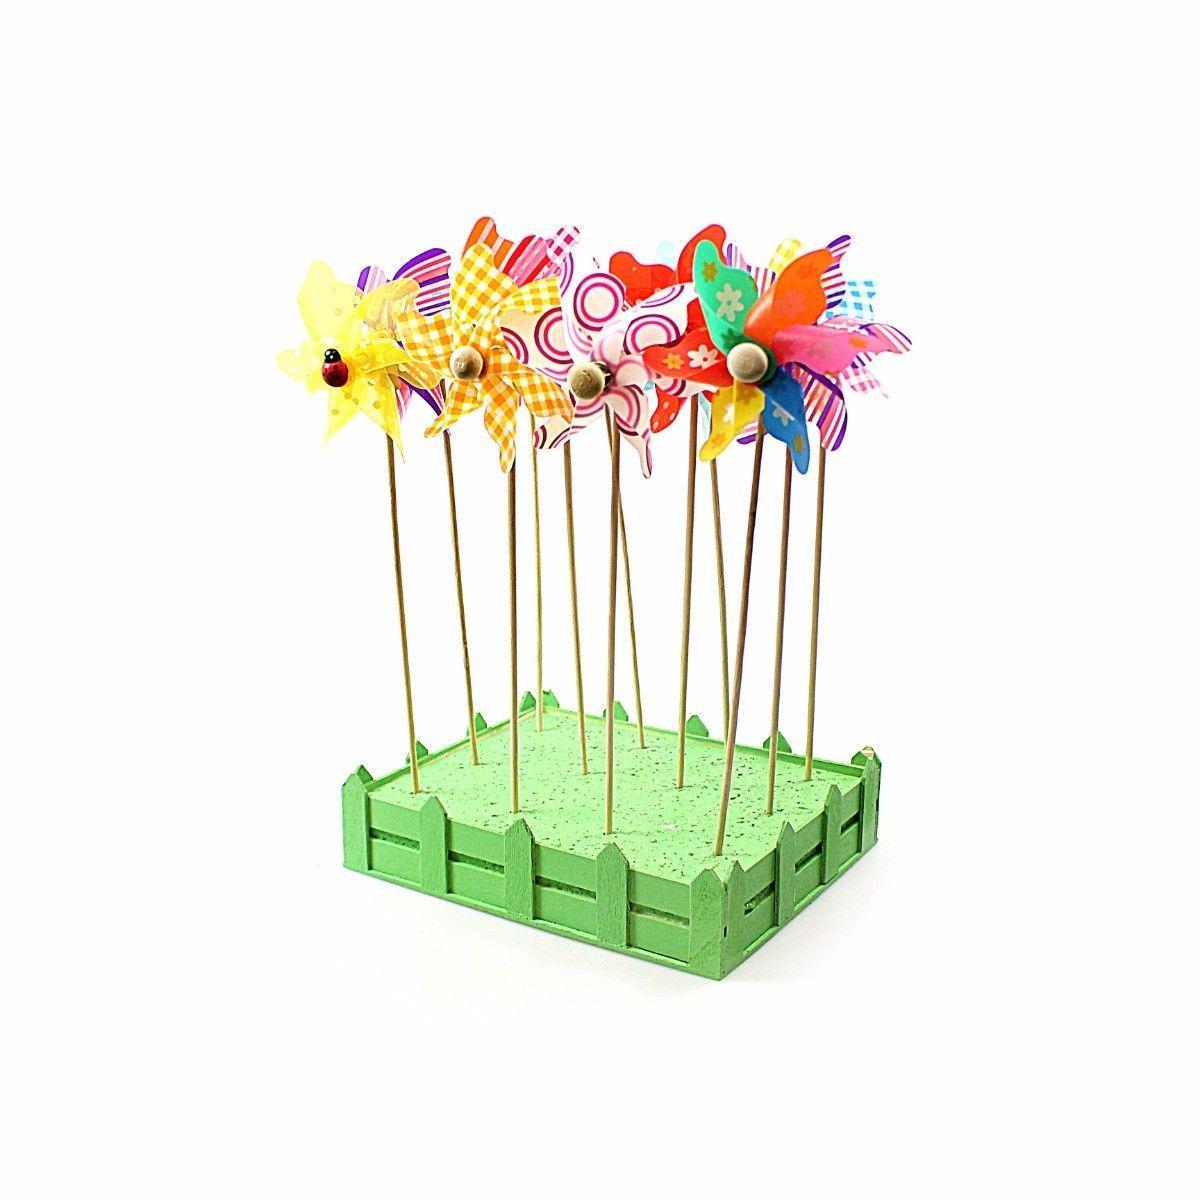 Plastic Colourful Windmill Pinwheel Wind Spinner x1 Outdoor Garden Party Decor 2118 (Parcel Rate)